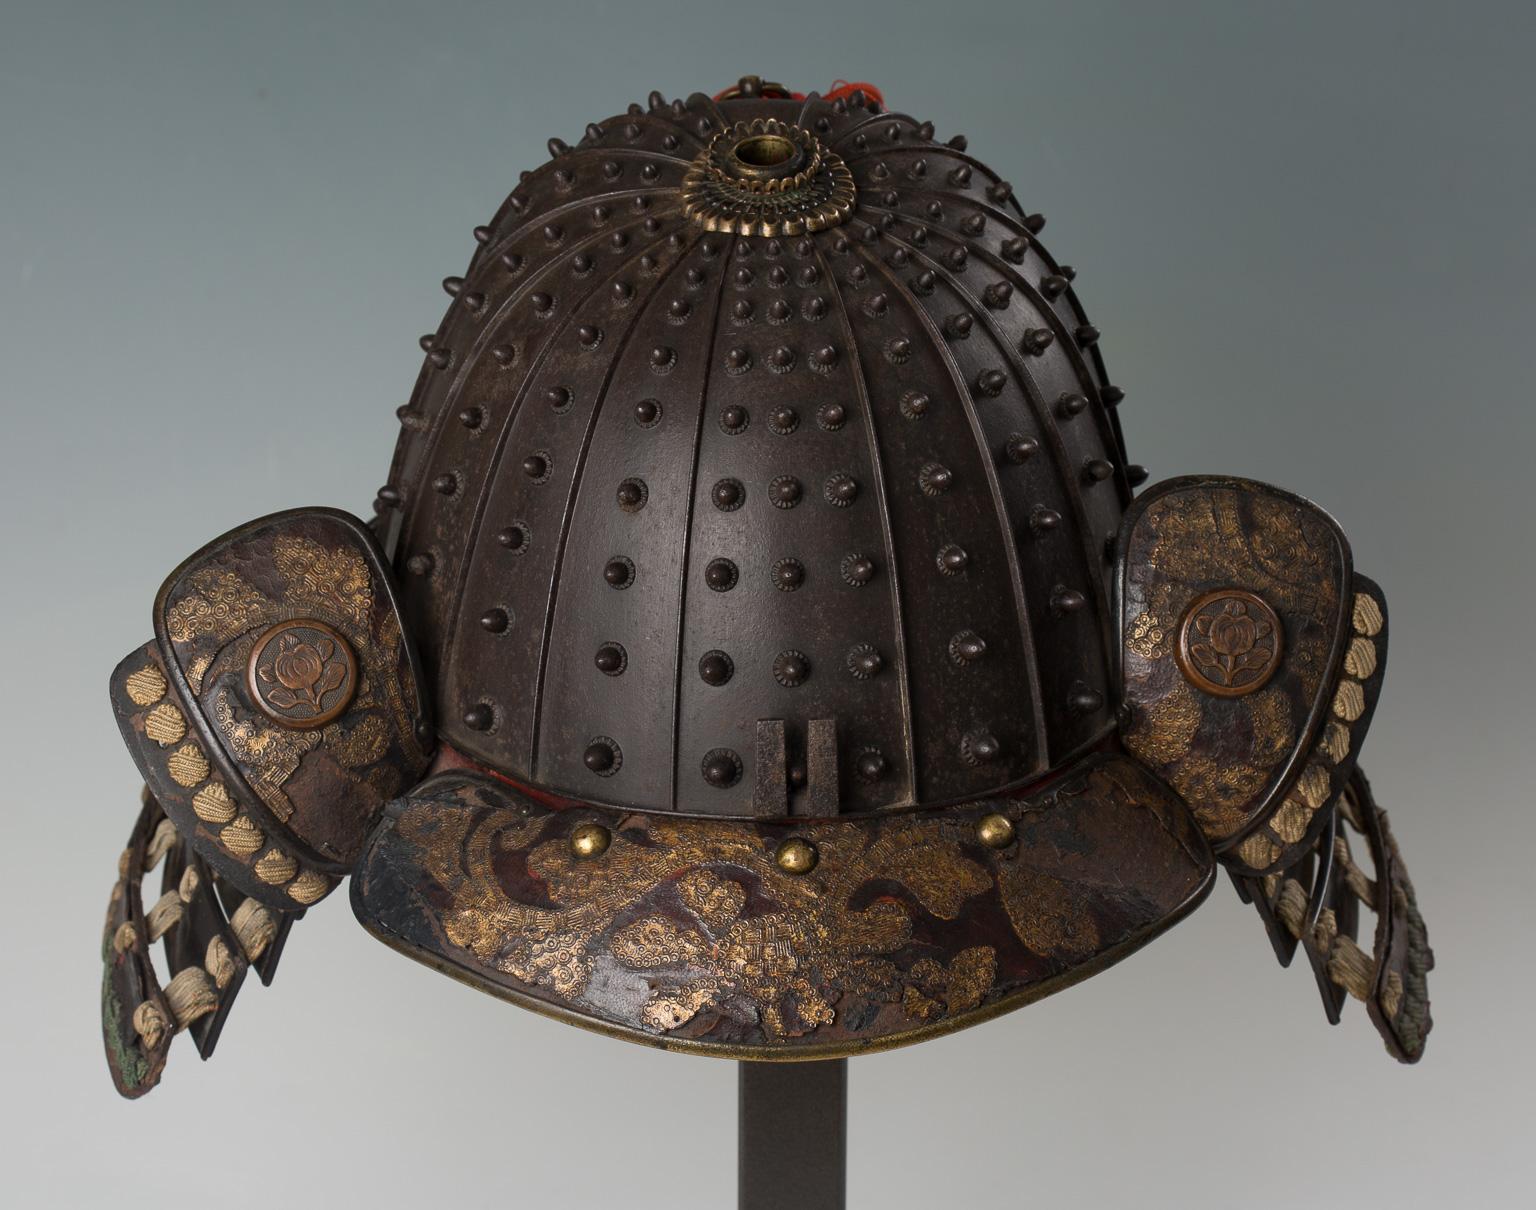 This heavy helmet is typical of the work of the armor makers in the province of Kaga. Each plate is fitted with a row of nine rivets of diminishing size toward the top, with the exception of the front and rear plates, the former with three rows of